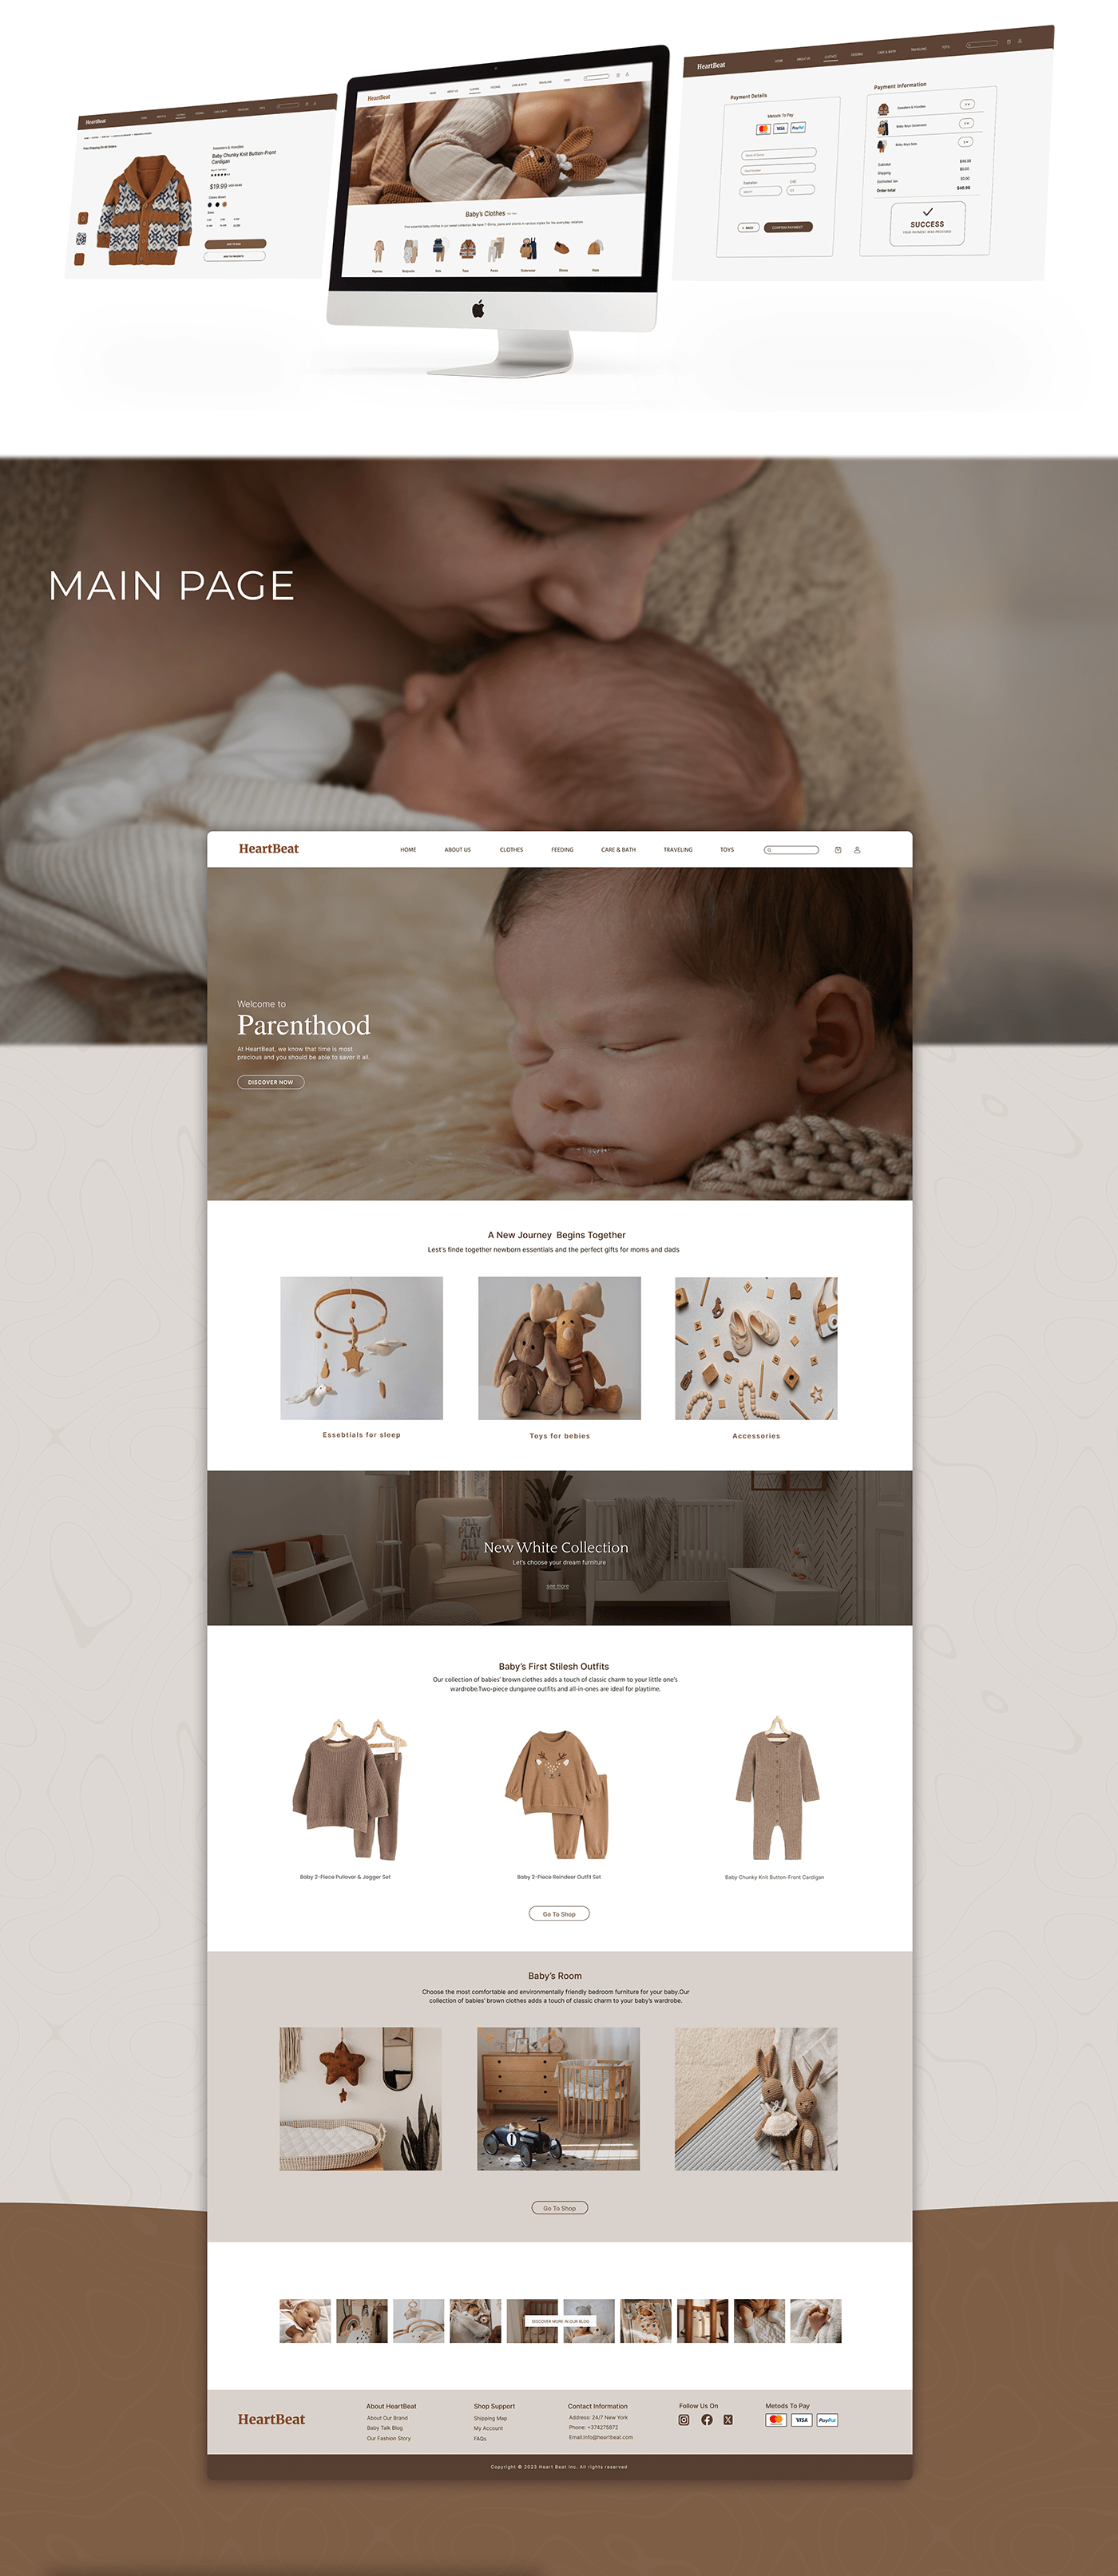 Web Design  ux/ui user interface user experience Interface Ecommerce Clothing shop baby visual identity